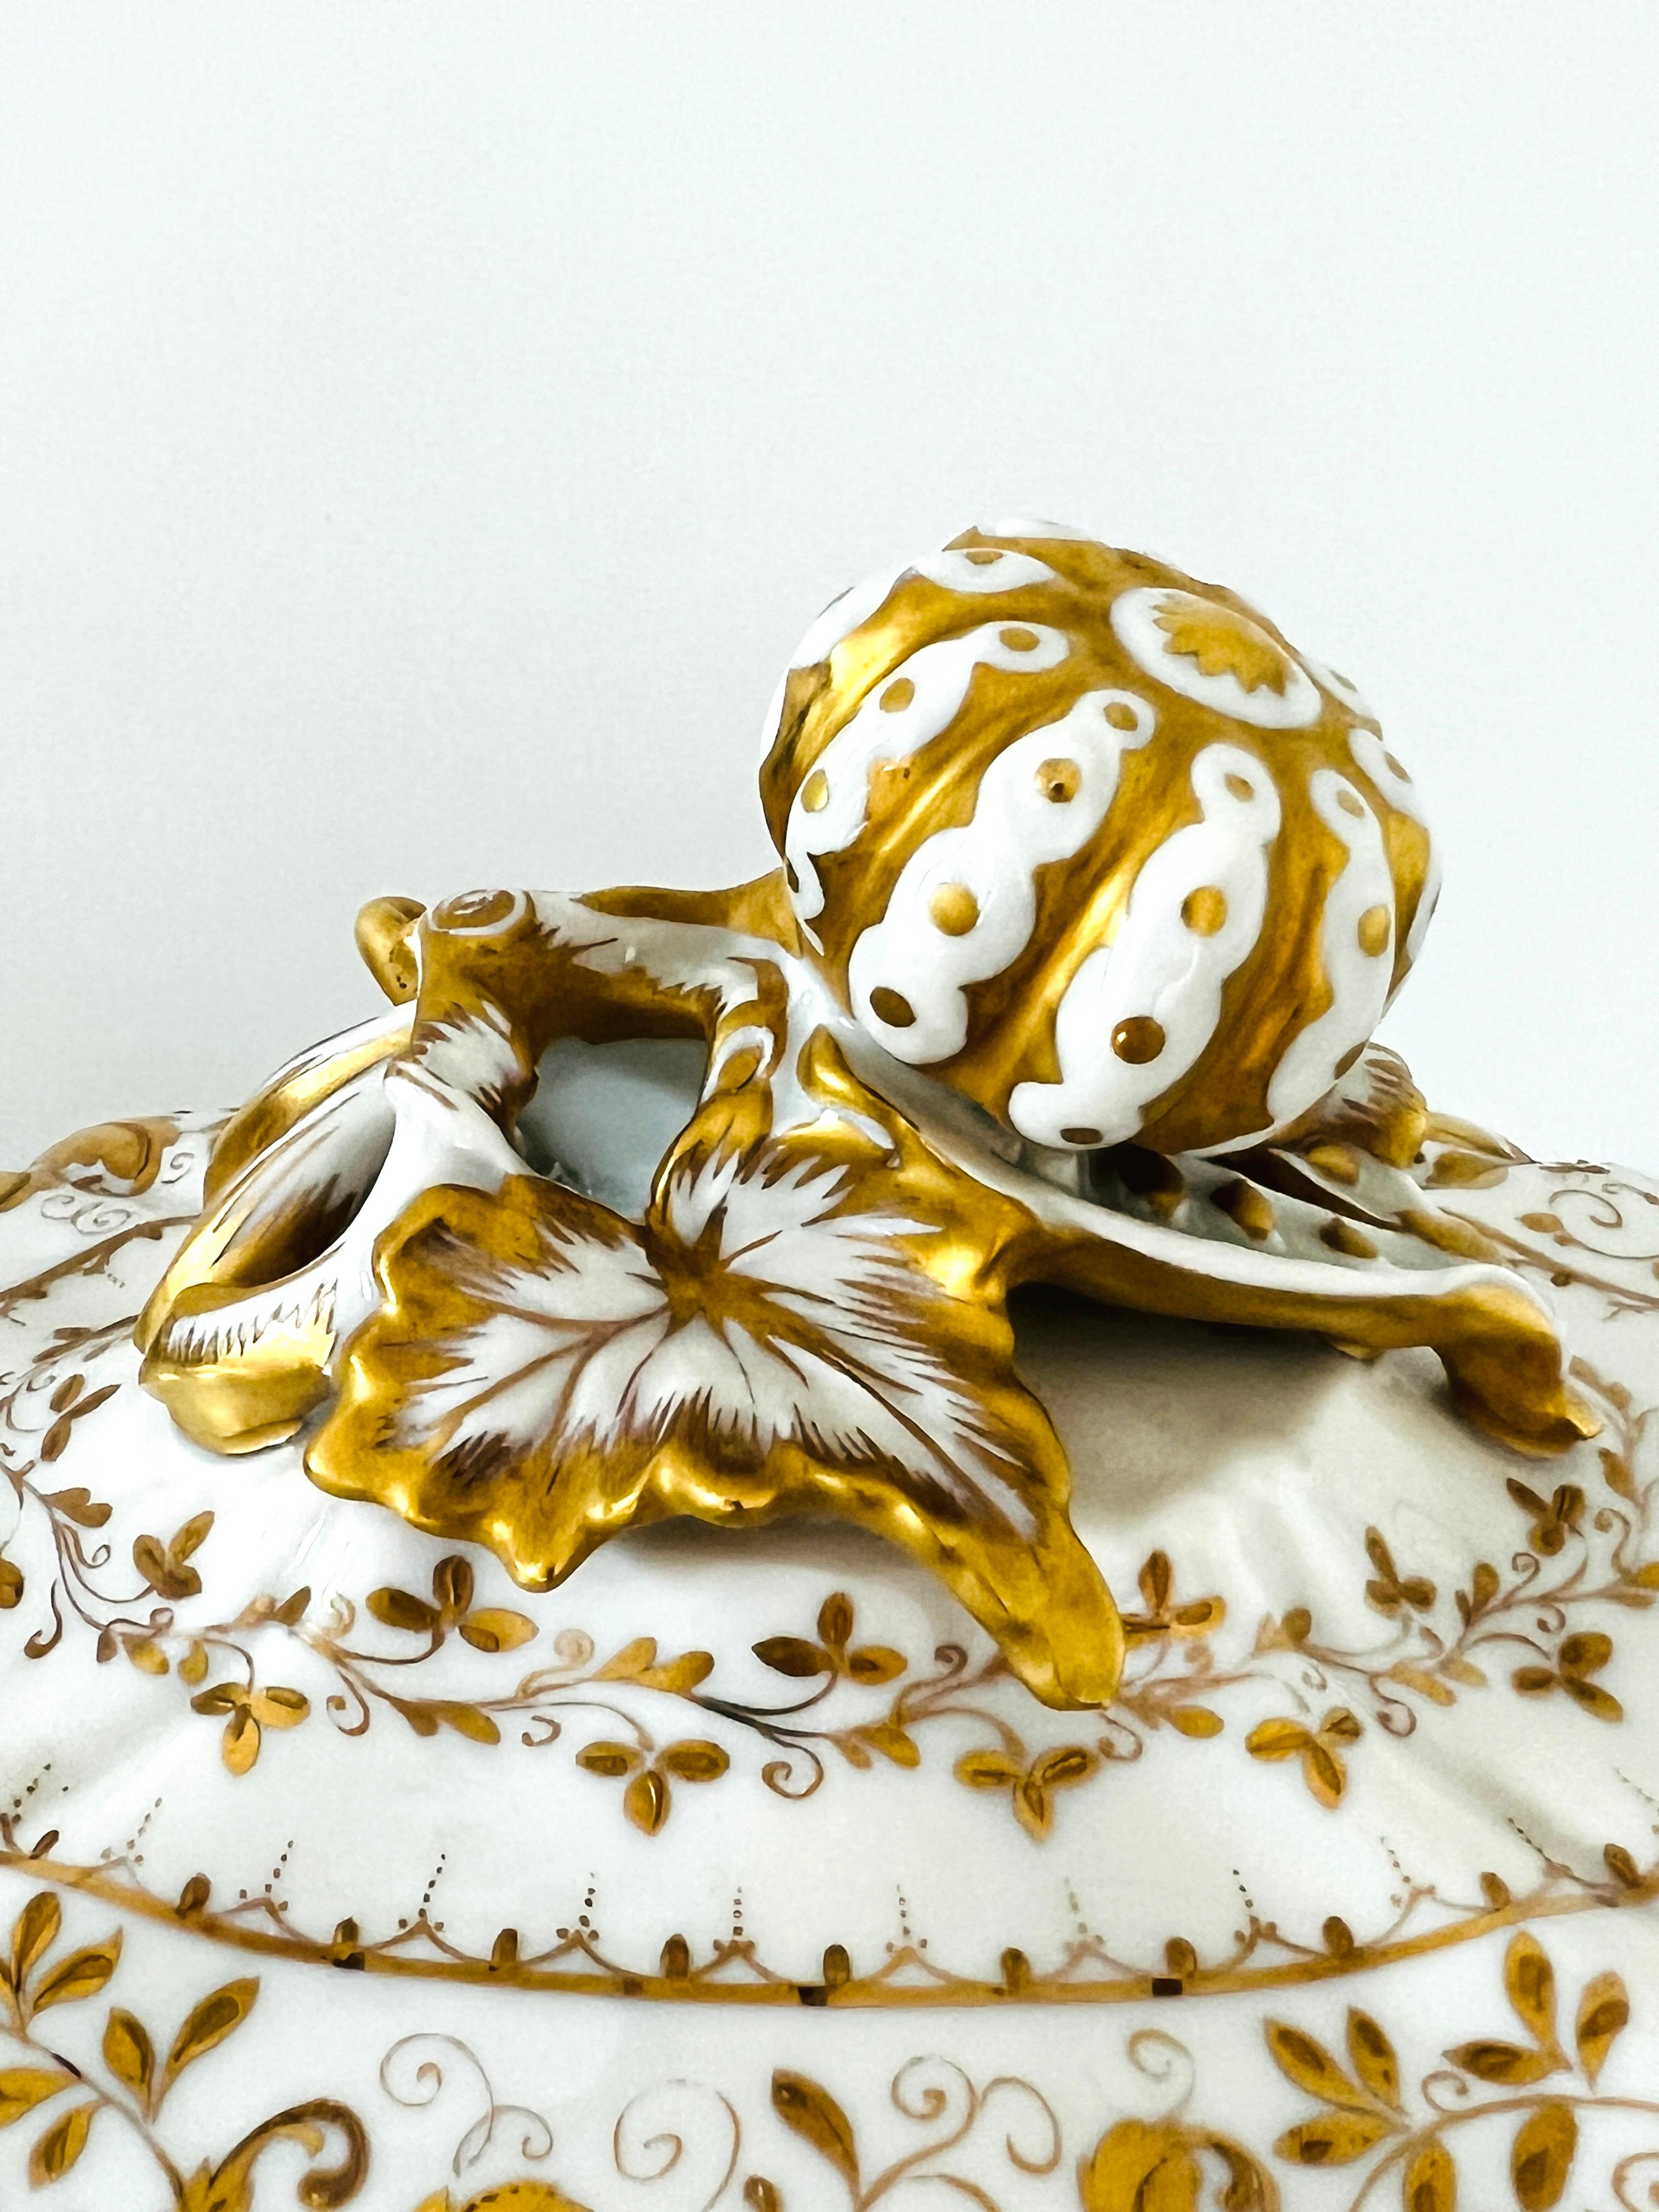 Le Tallec Hand Painted Porcelain Tureen with Gold Leaf Motifs, Paris, circa 1960 In Good Condition For Sale In Fort Lauderdale, FL